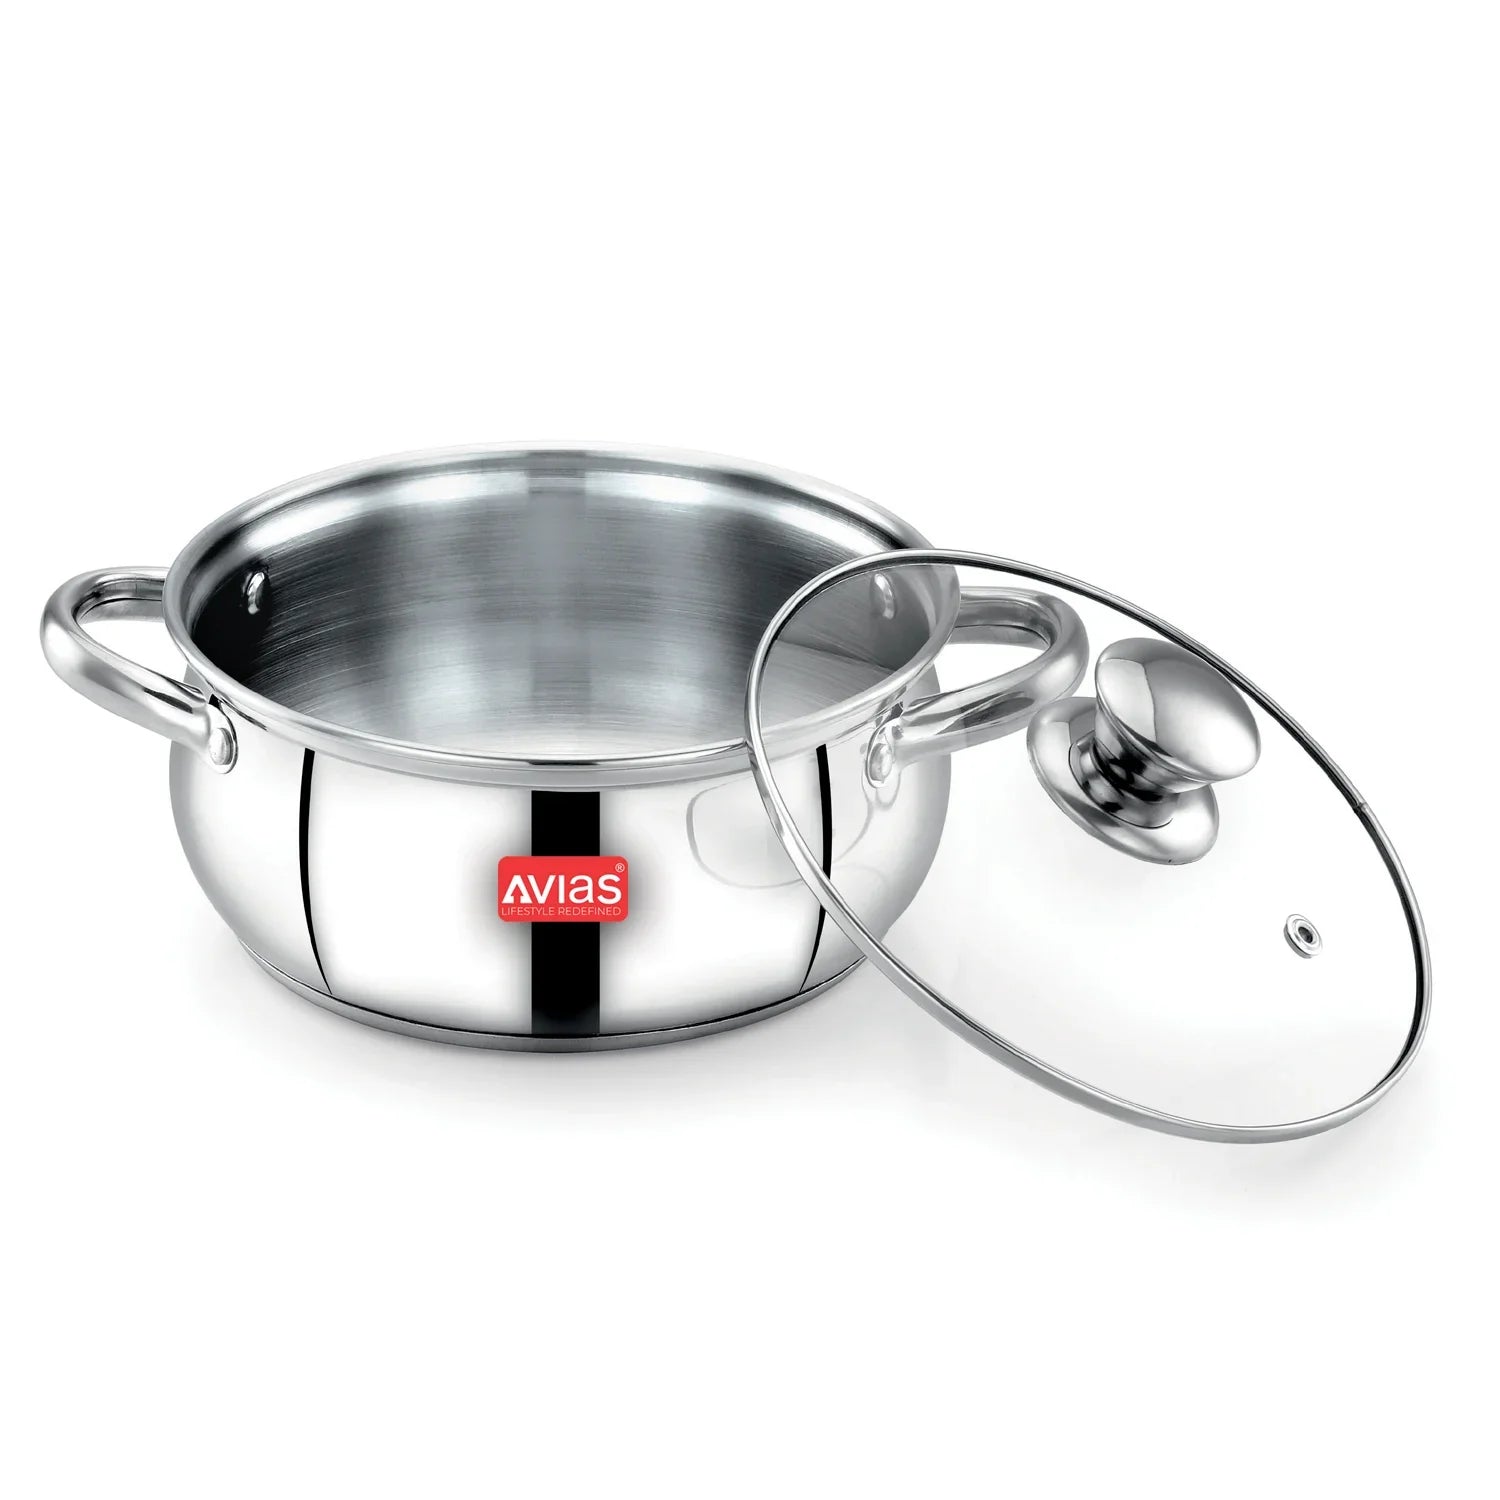 AVIAS Inox IB stainless steel cookpot with glass lid with steam vent open